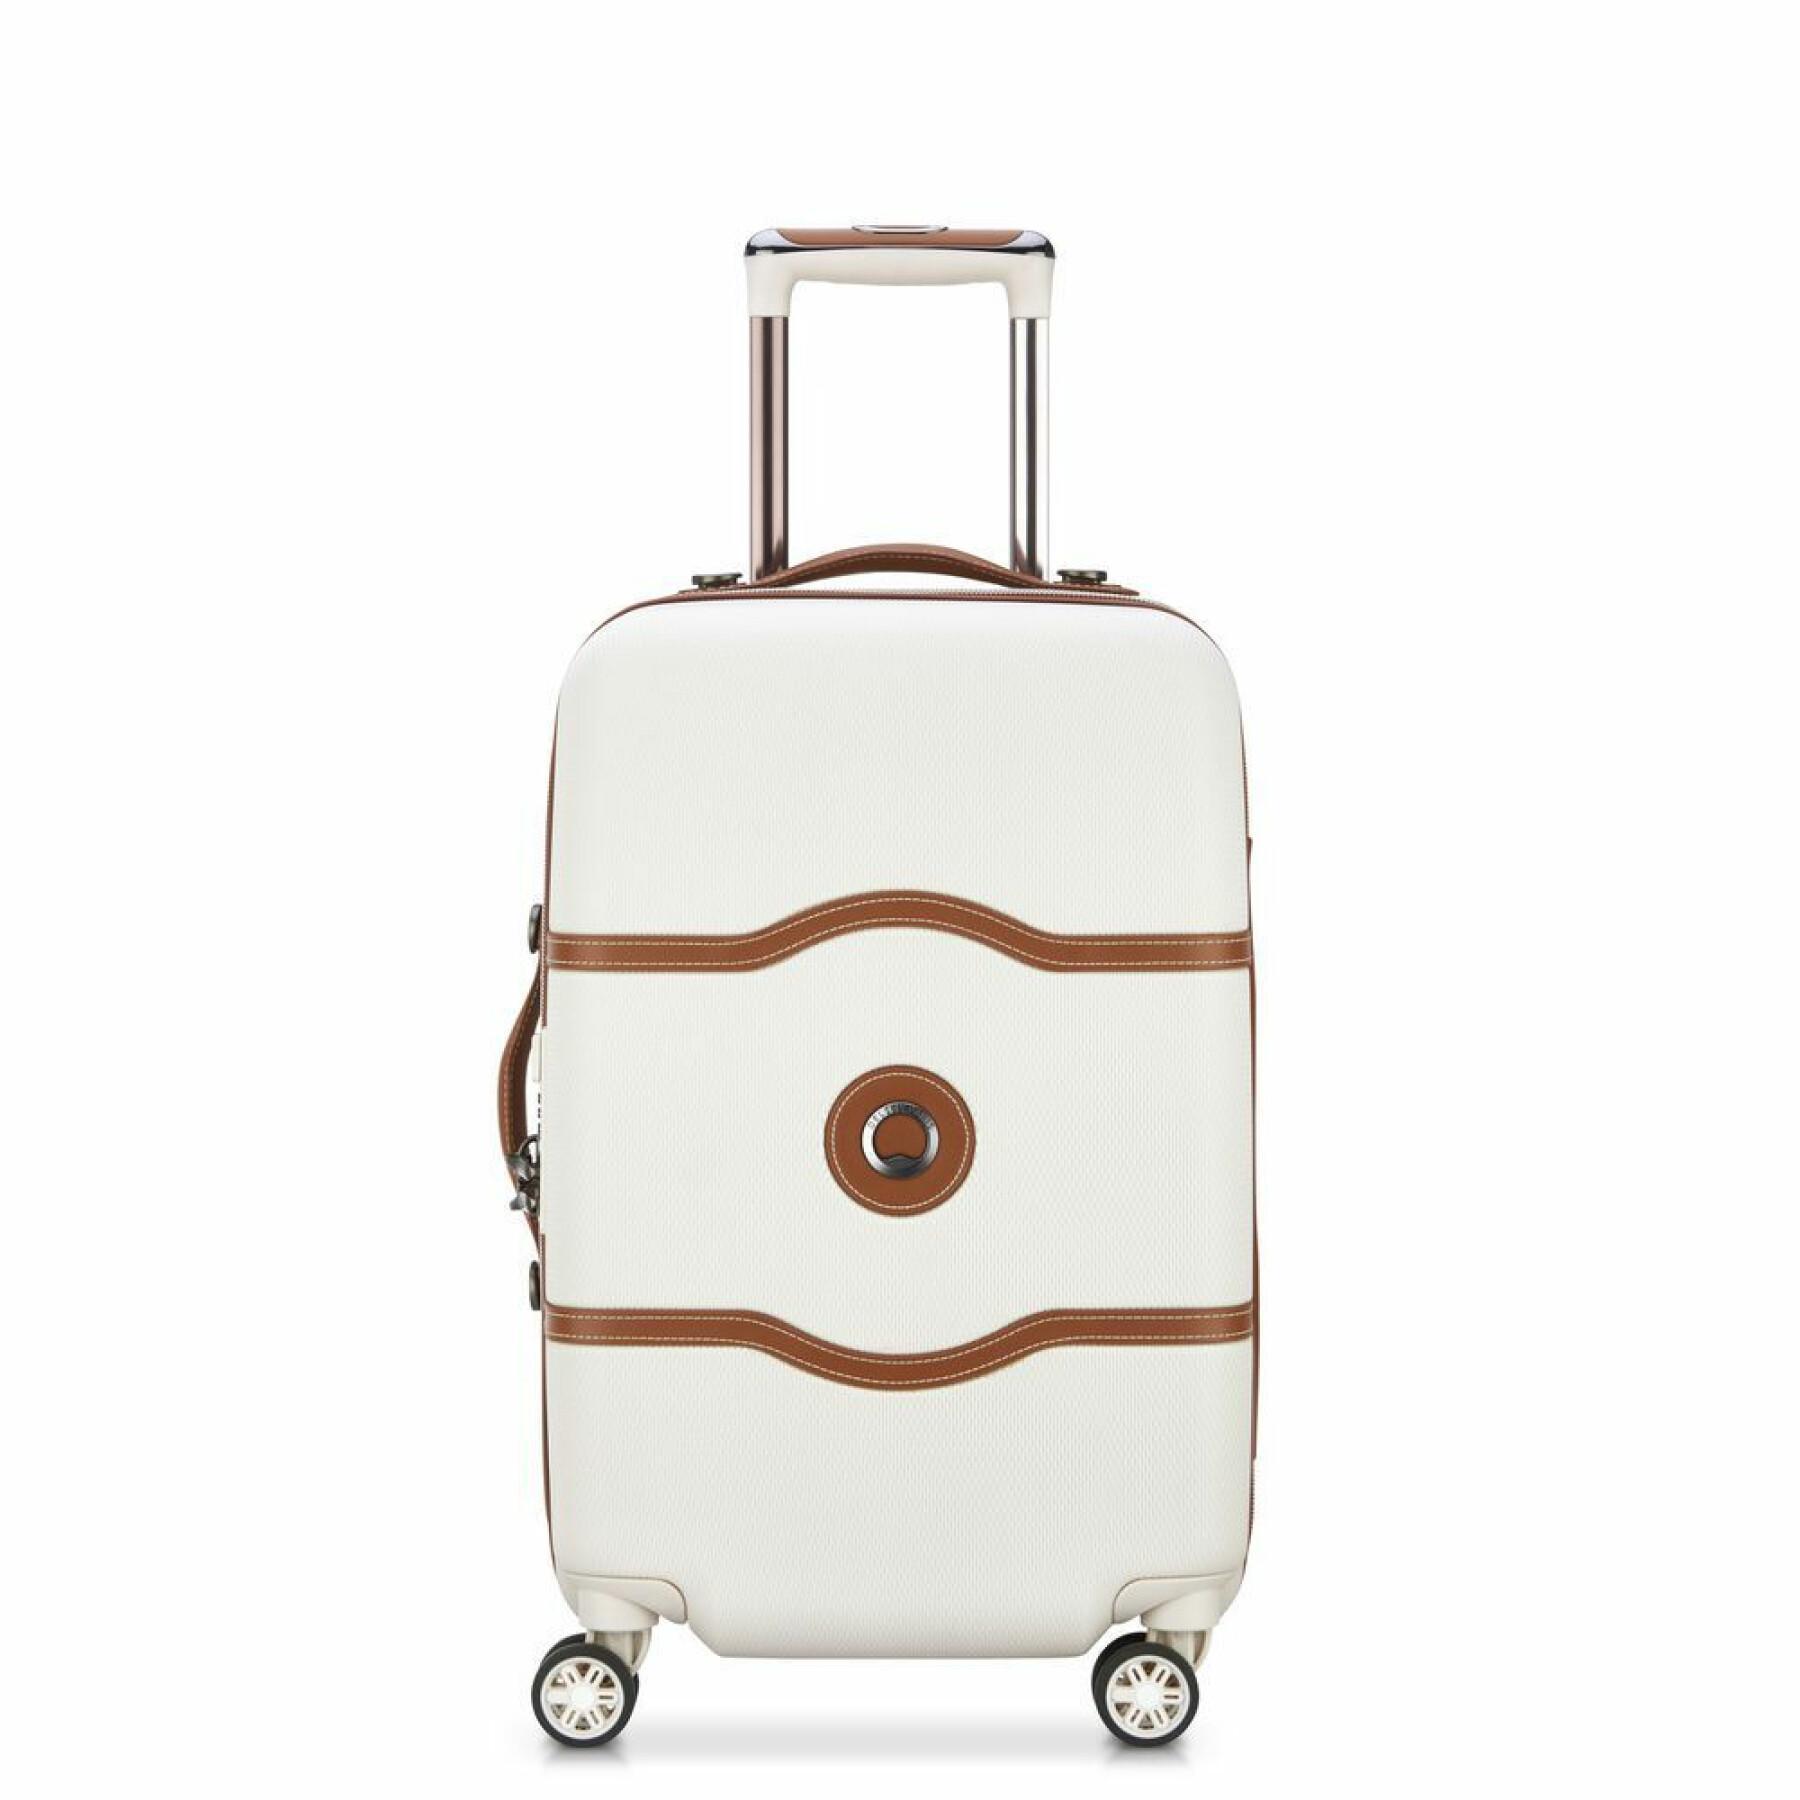 Trolley cabin suitcase 4 double wheels Delsey Chatelet Air 2.0 55 cm